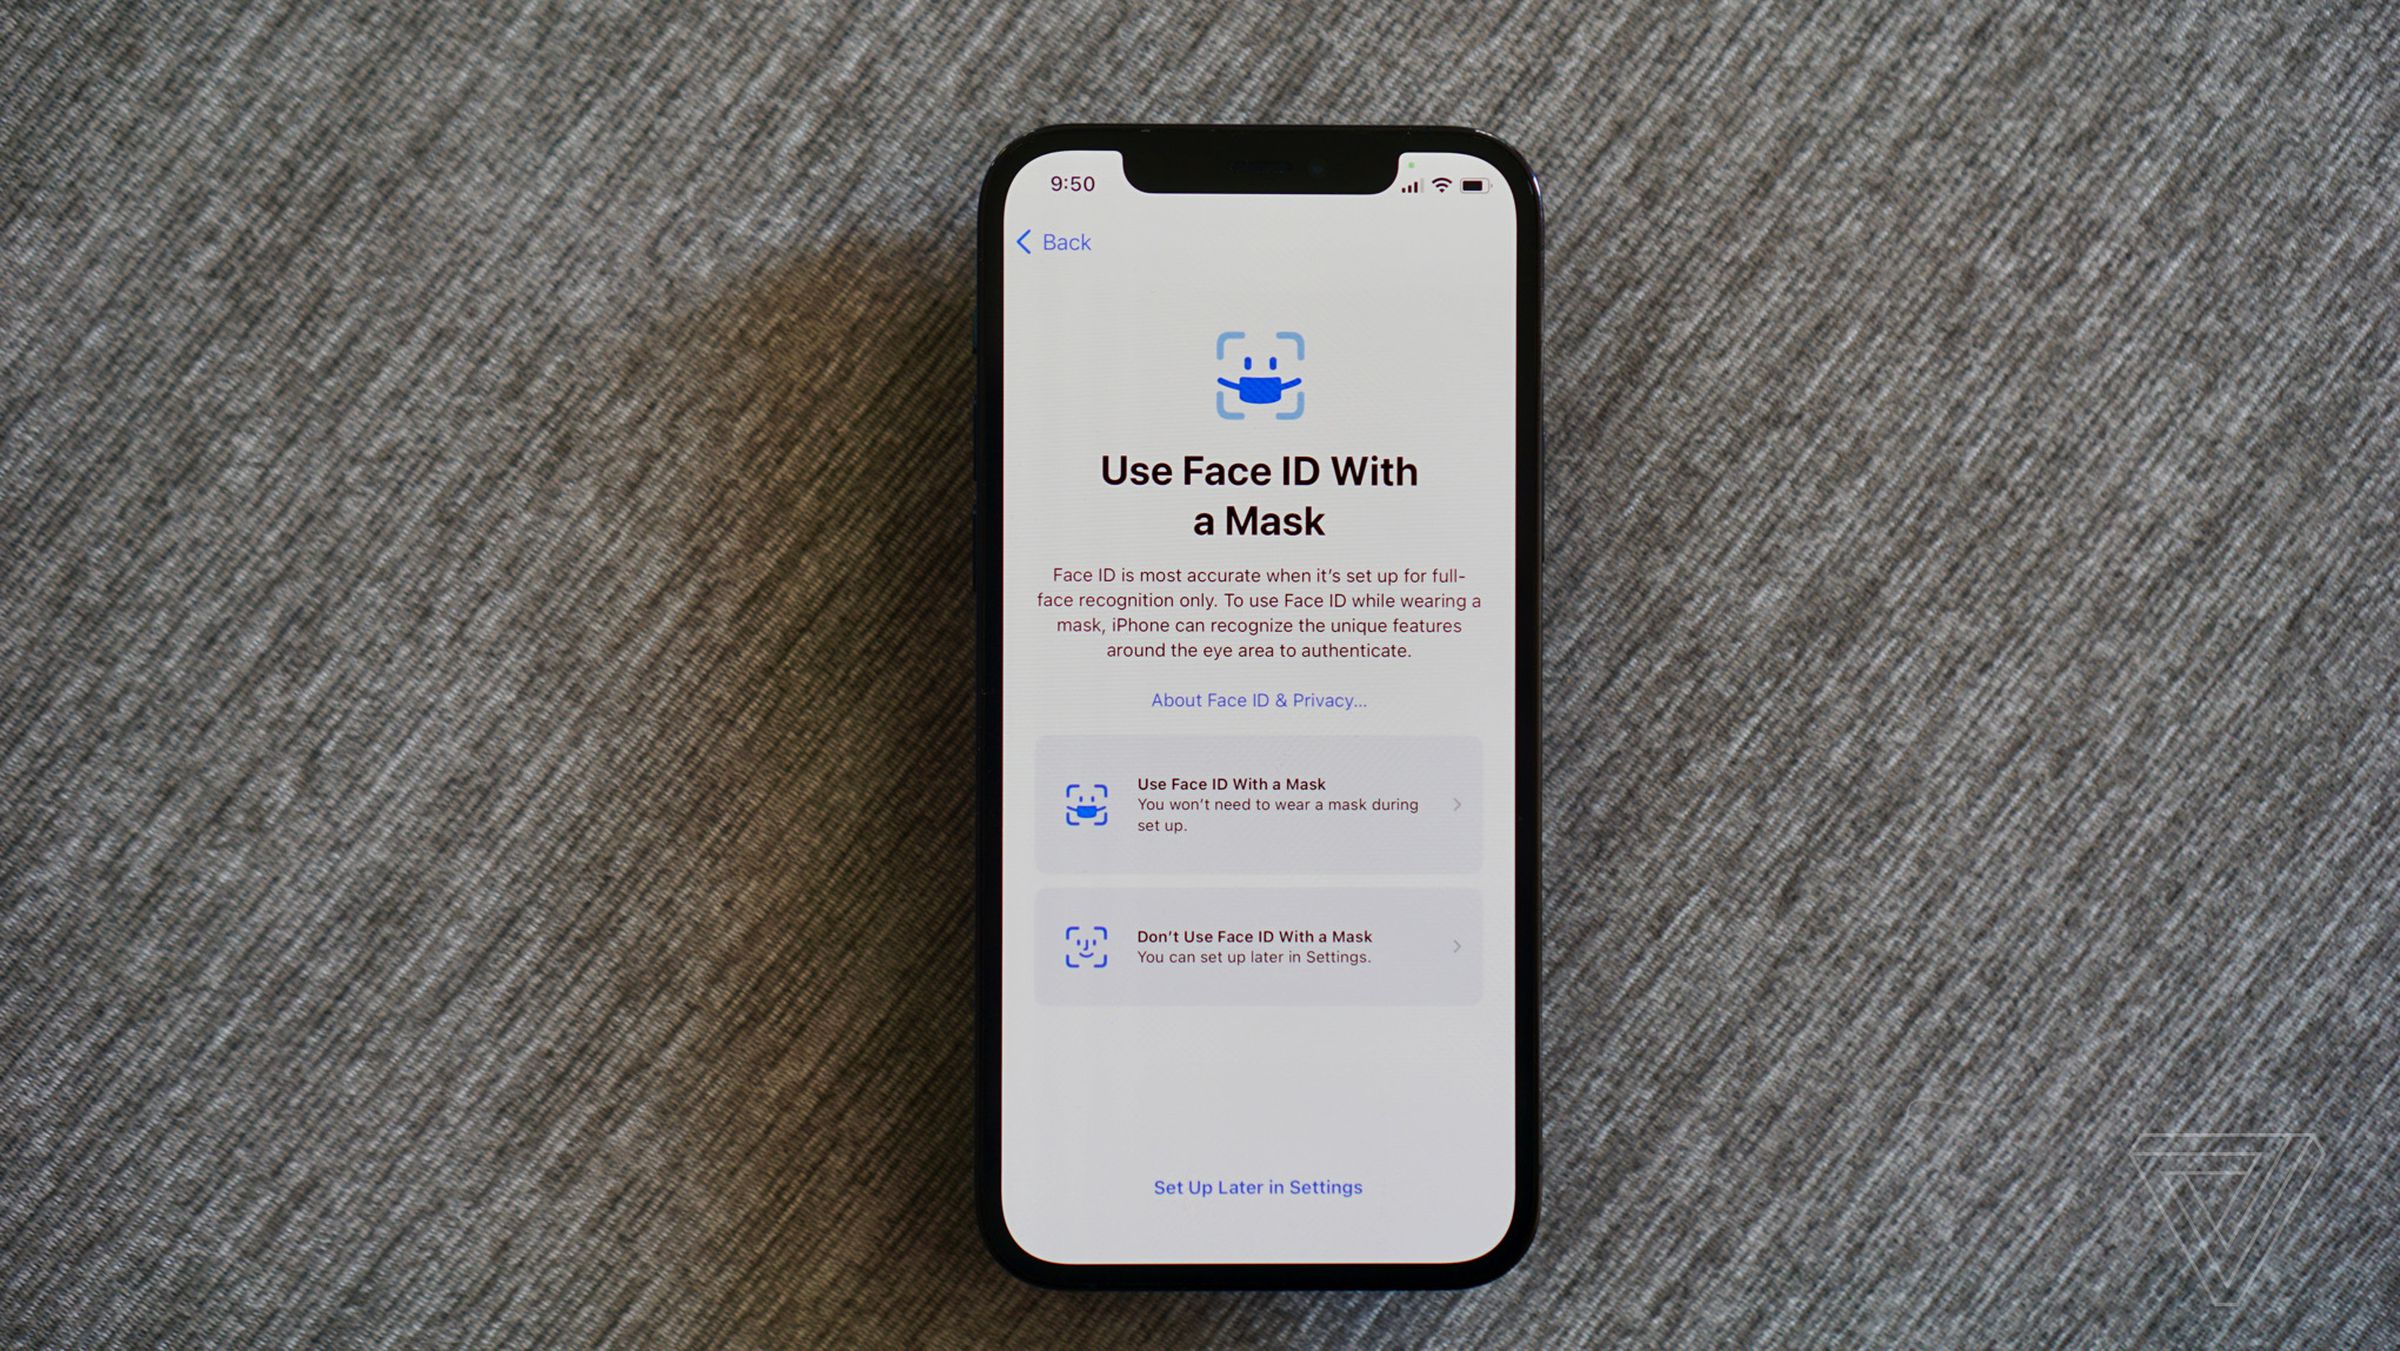 Apple’s splash screen notifying users about the new Face ID mask functionality